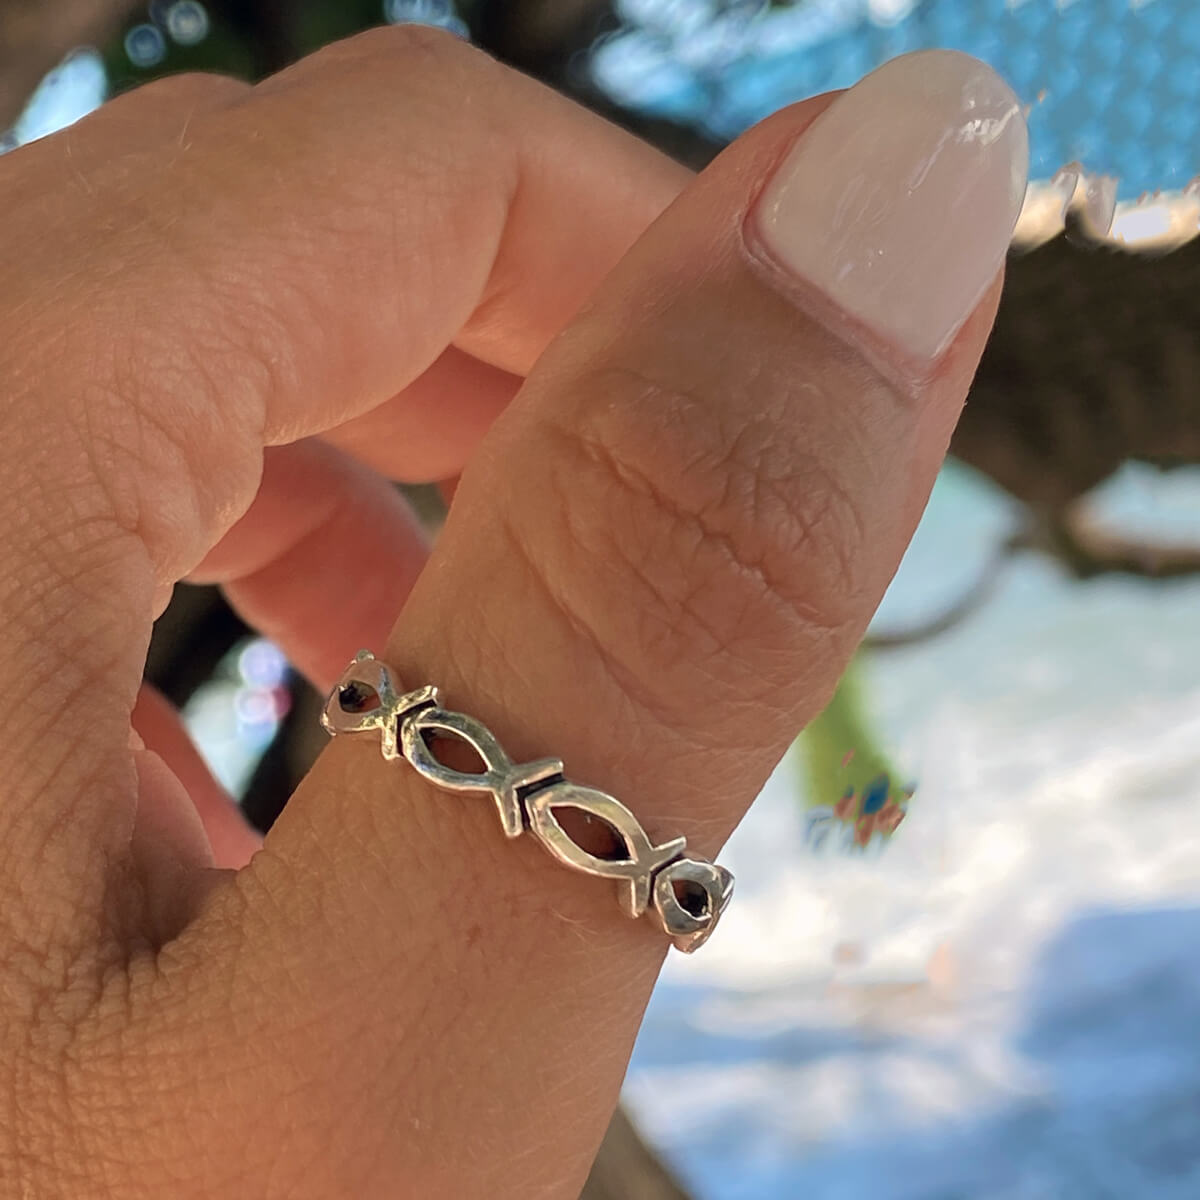 Ichthus Fish Ring Sterling Silver Jewelry